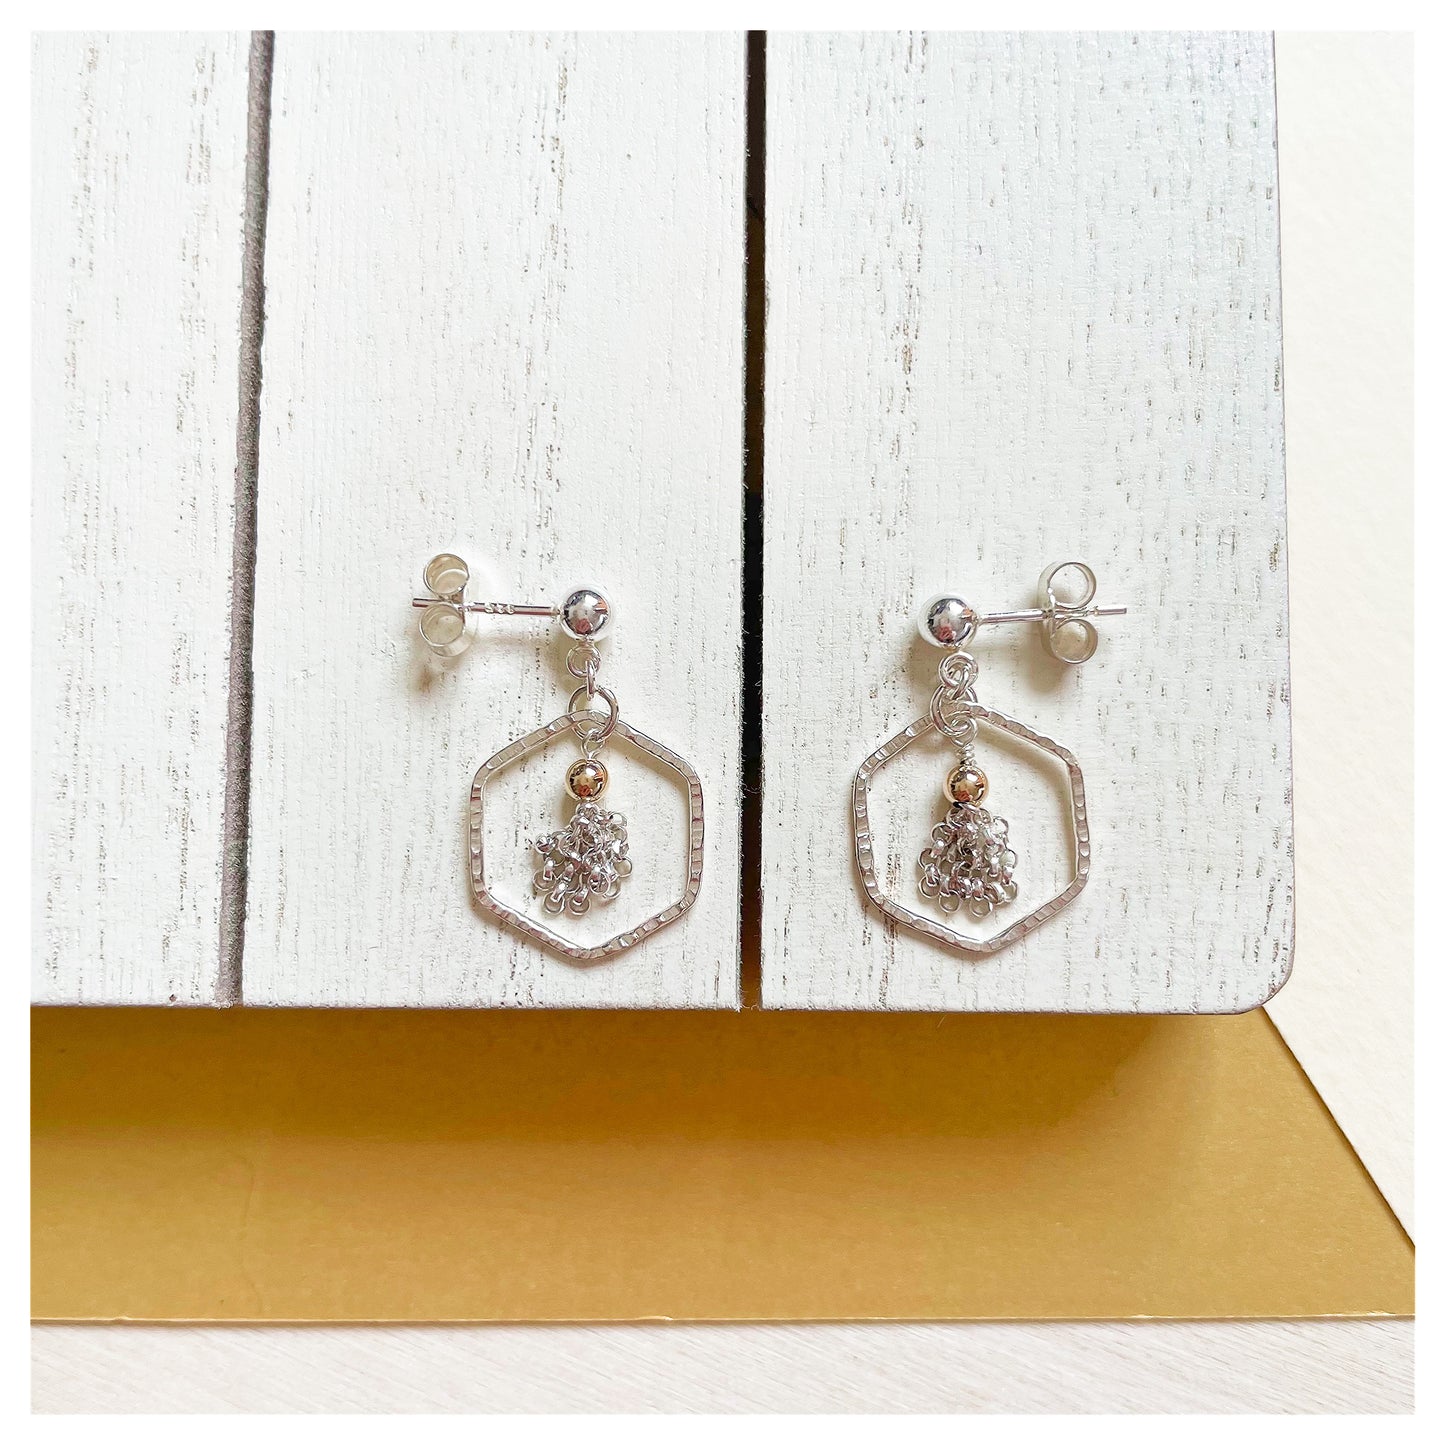 Mini Sterling Silver and 9ct Yellow Gold Hammered Hexagon and Tassel Drop Stud Earrings.